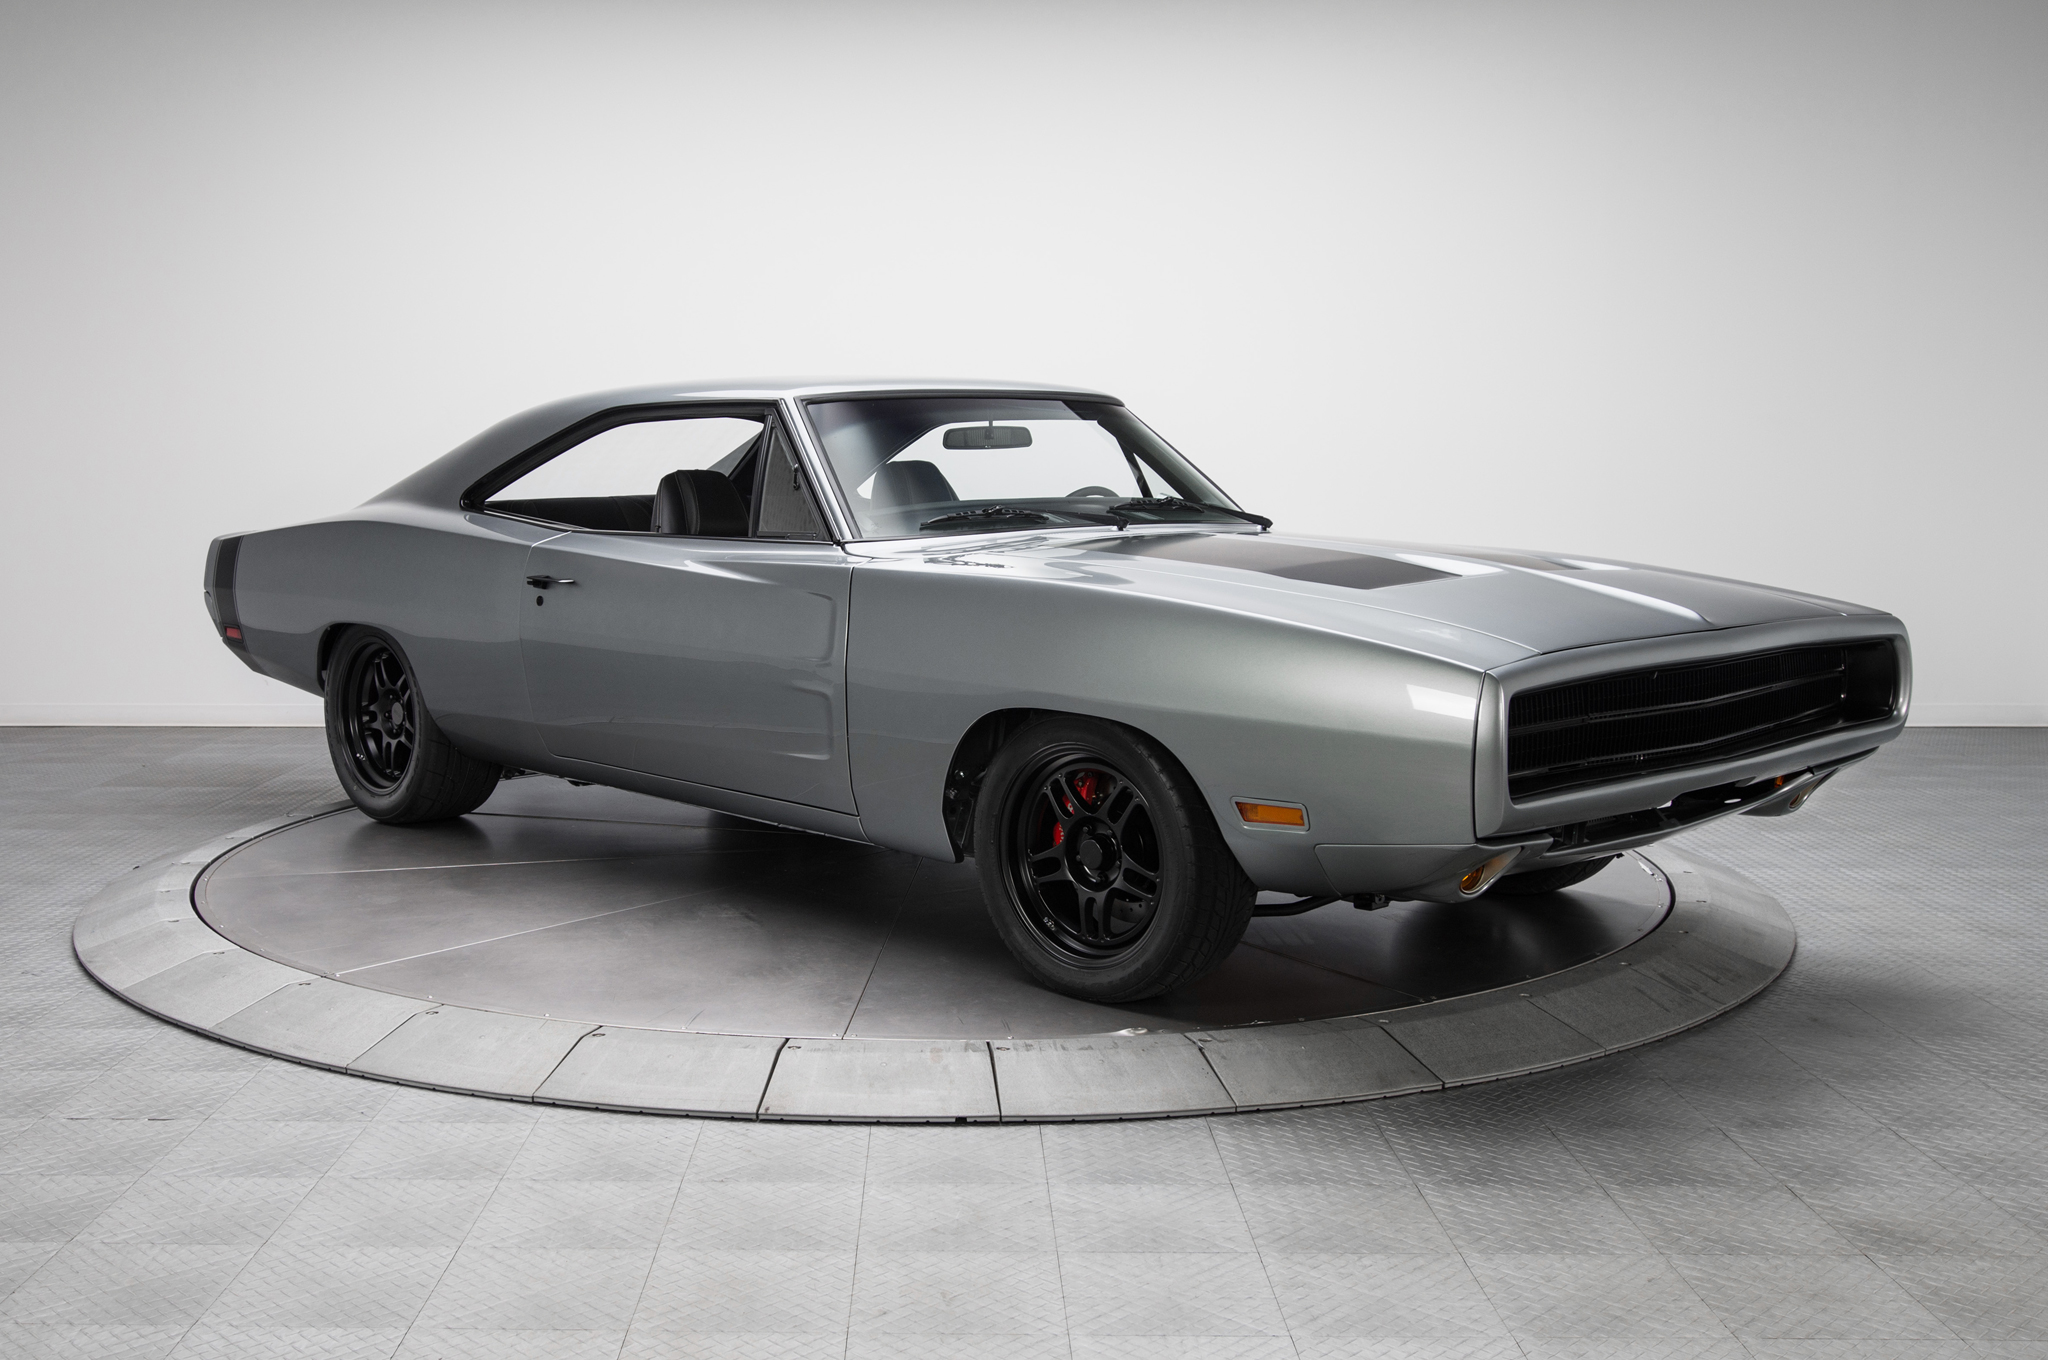 1970 Dodge Charger Grey - HD Wallpaper 